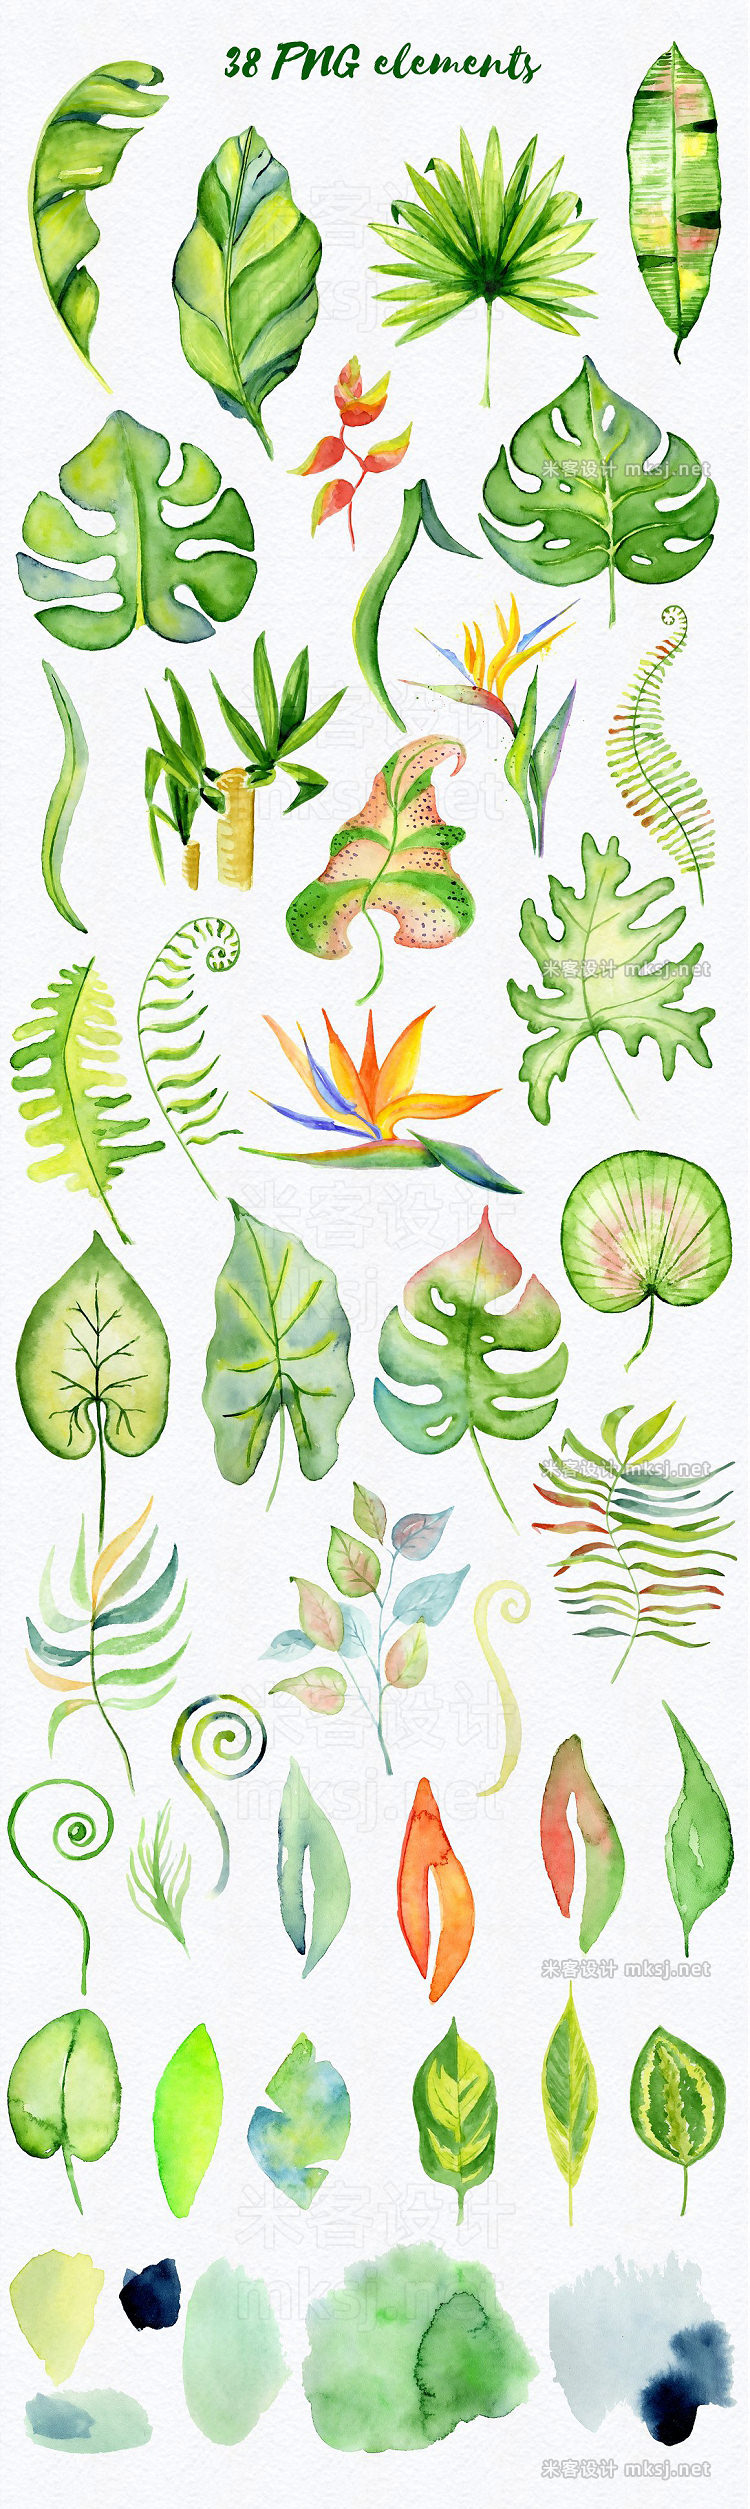 png素材 Tropical leaves Watercolor clipart